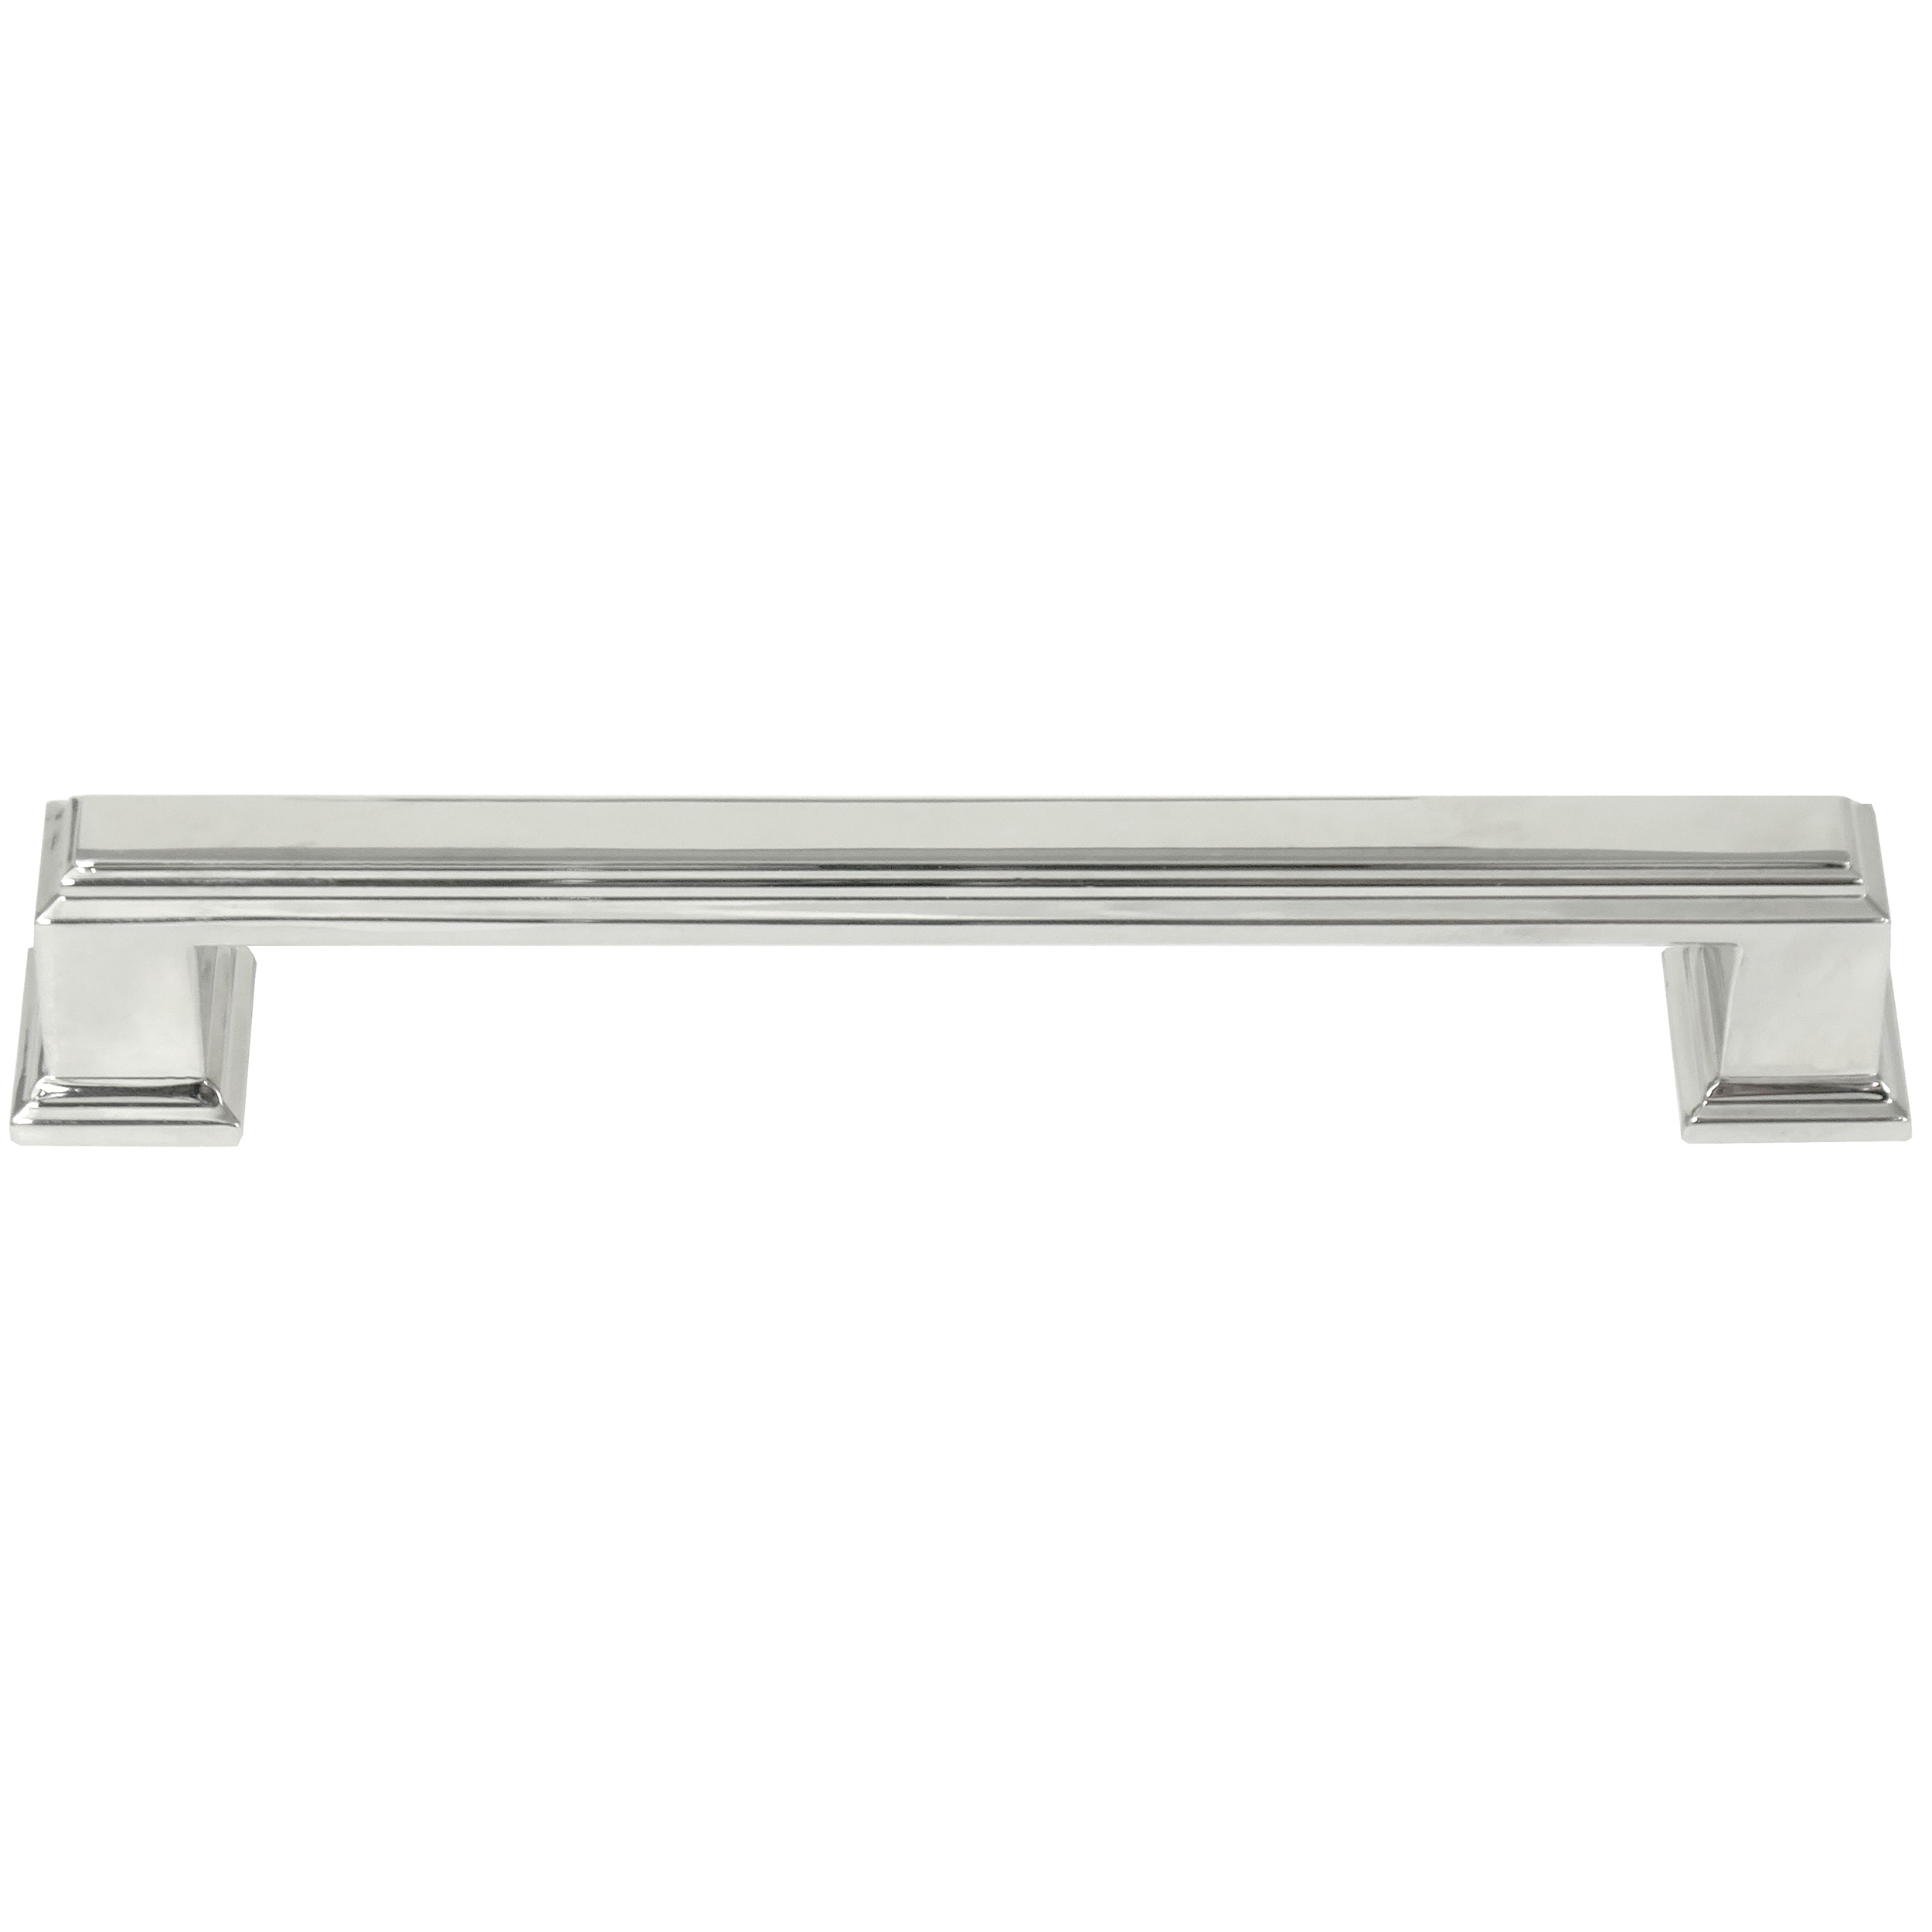 Beacon Hill 7-9/16-in Center to Center Polished Nickel Rectangular Handle Drawer Pulls in Chrome | - MNG Hardware 19314